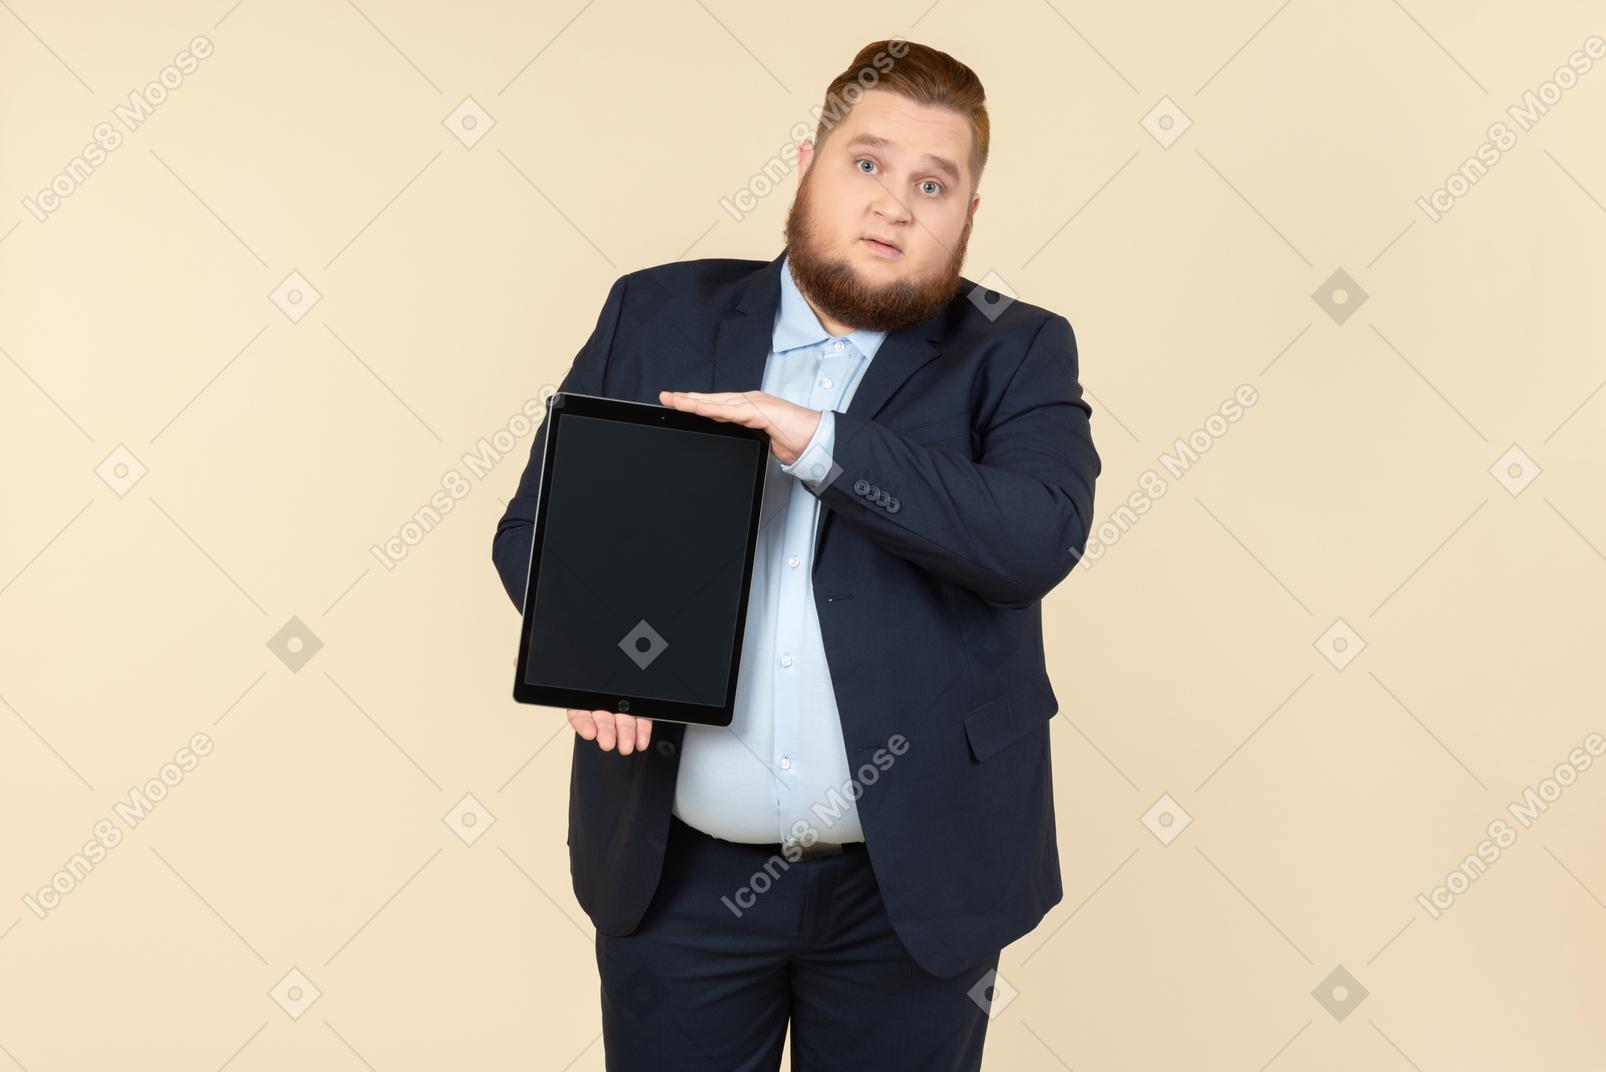 Young overweight man holding digital tablet vertically